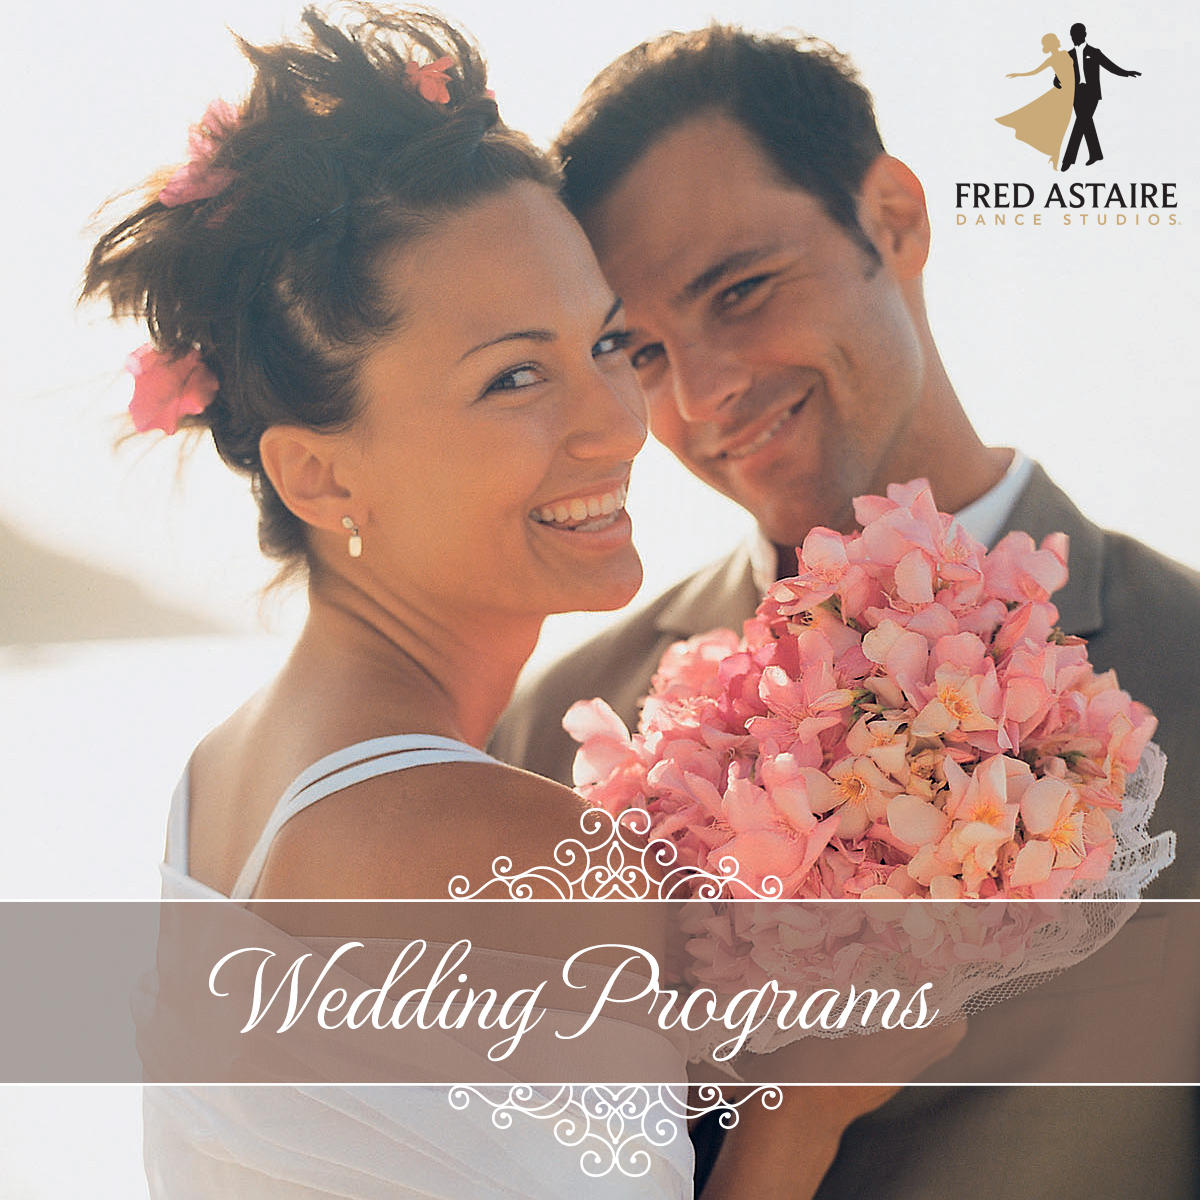 Are you getting married and looking to learn your first dance ? Then the Fred Astaire Dance Studios - Riverside is the place for you to learn! We teach in Private Dance Lessons, Group Dance Lessons and of course we have Parties for you to practice at! Call today to learn more! 401-415-9766